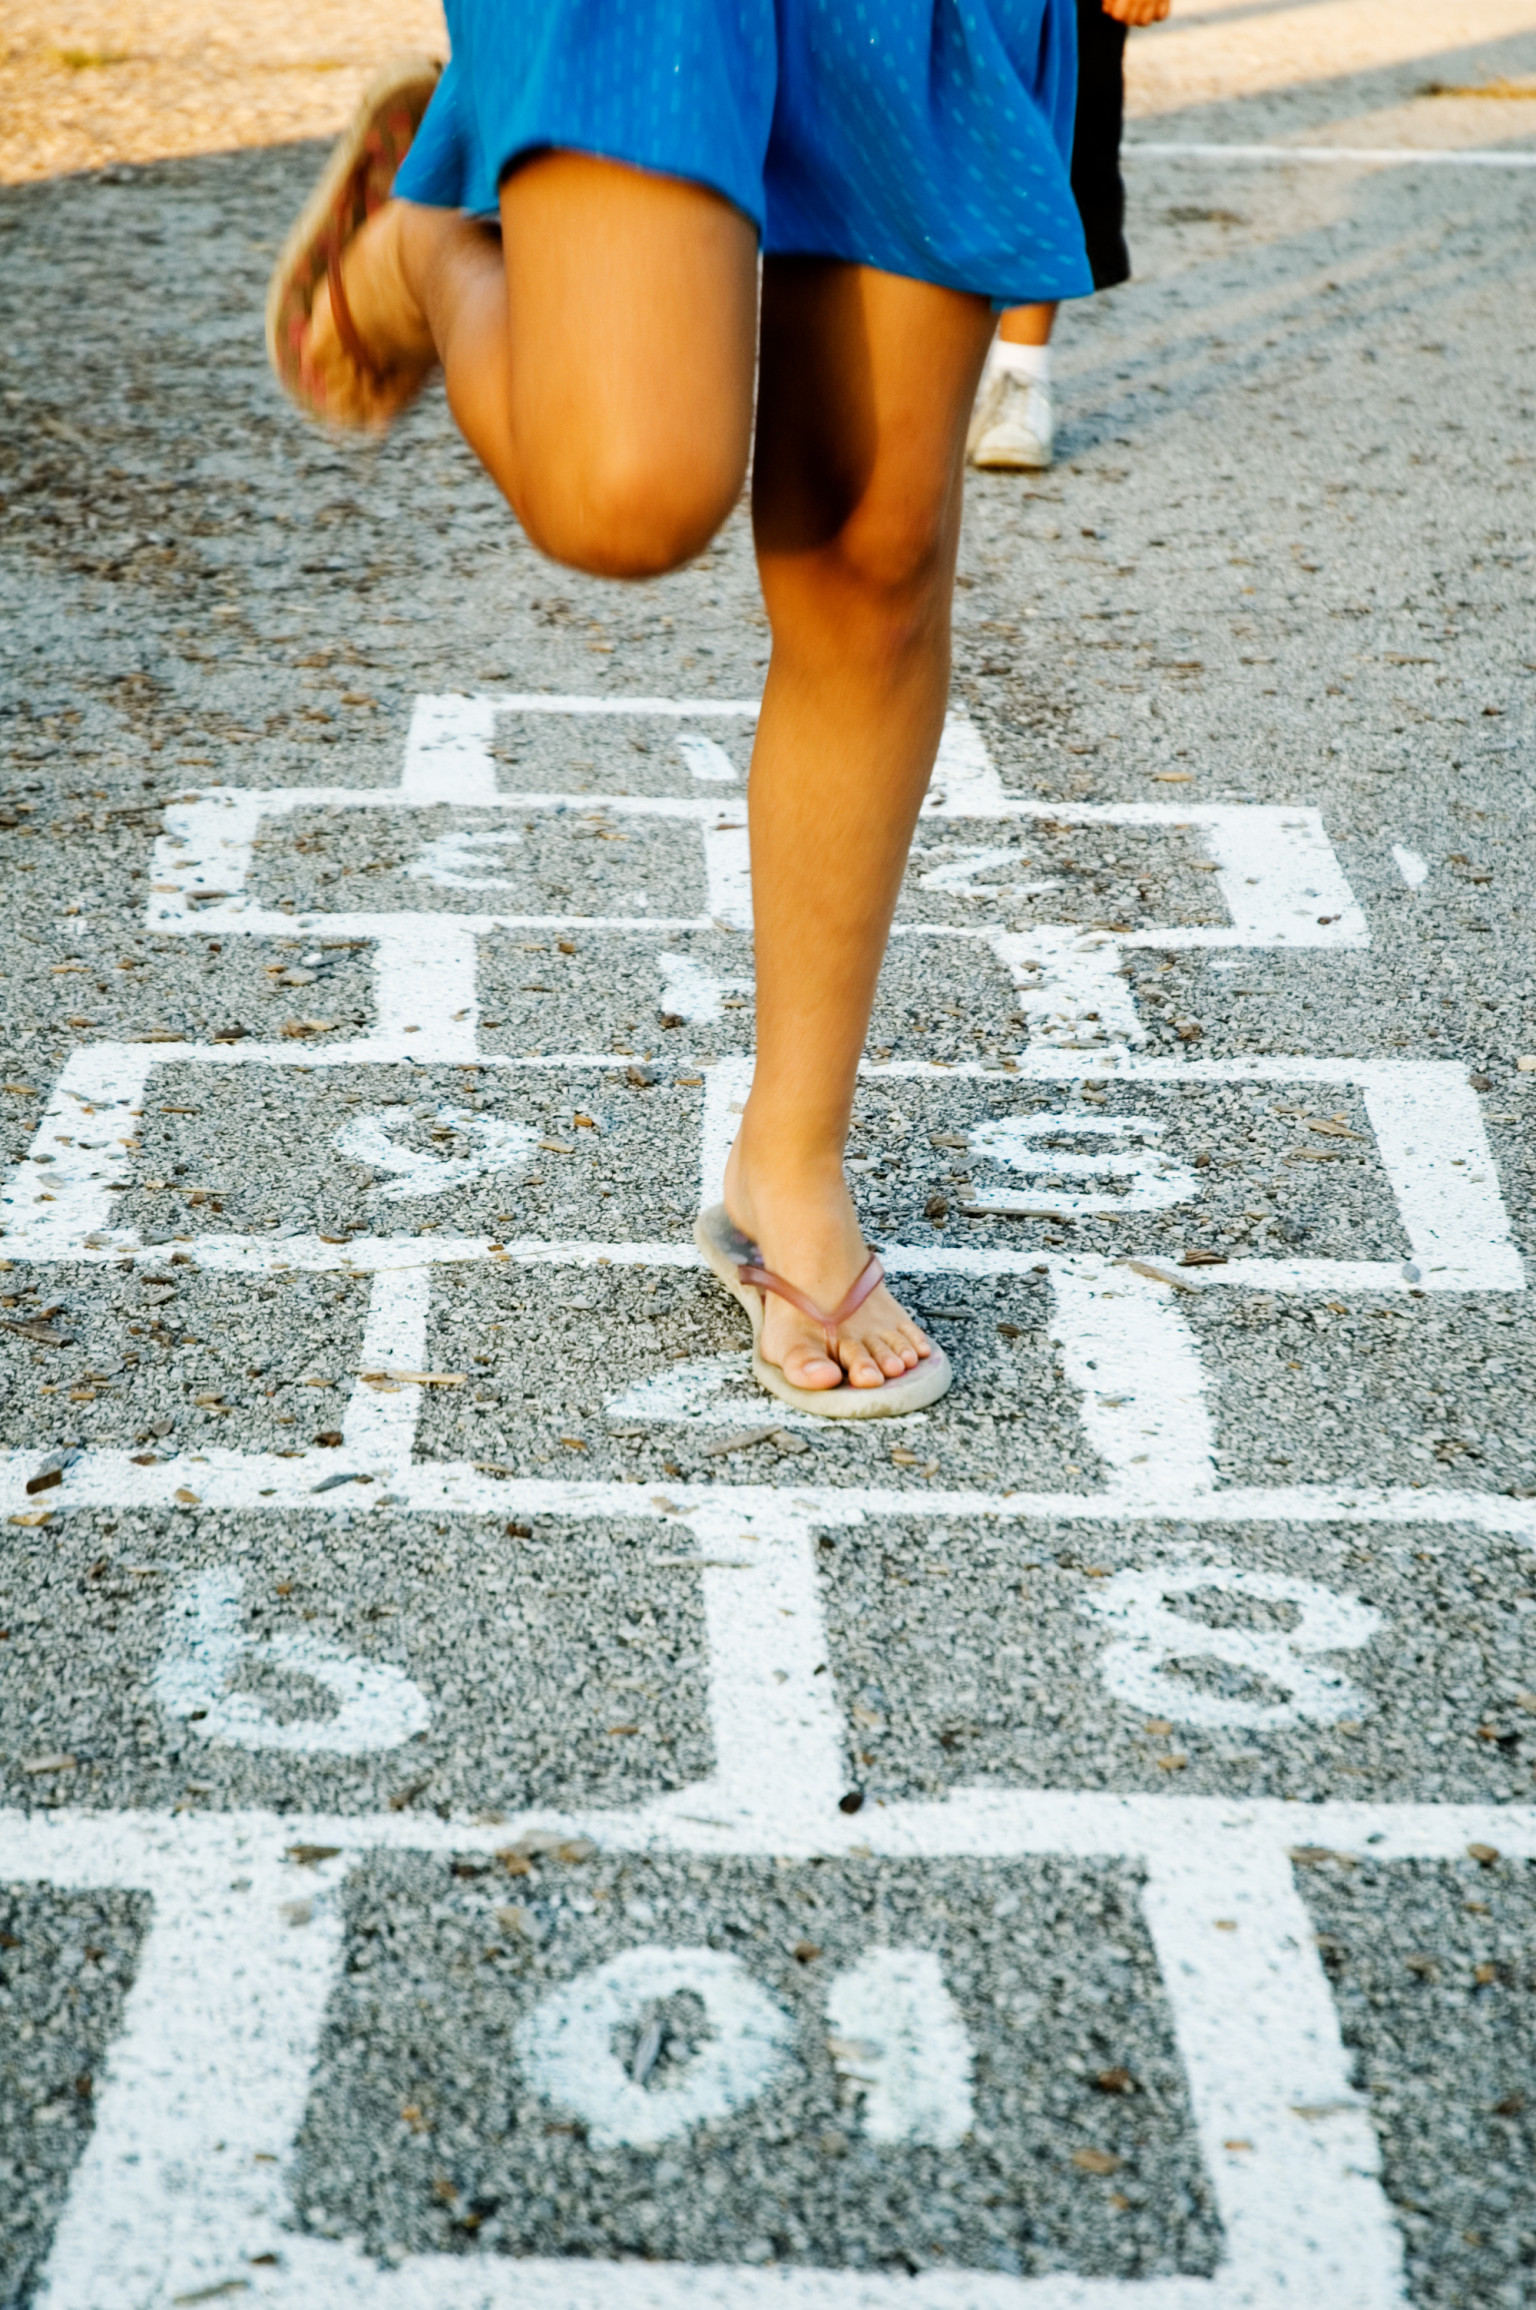 I Would Learn to Play Hopscotch | HuffPost